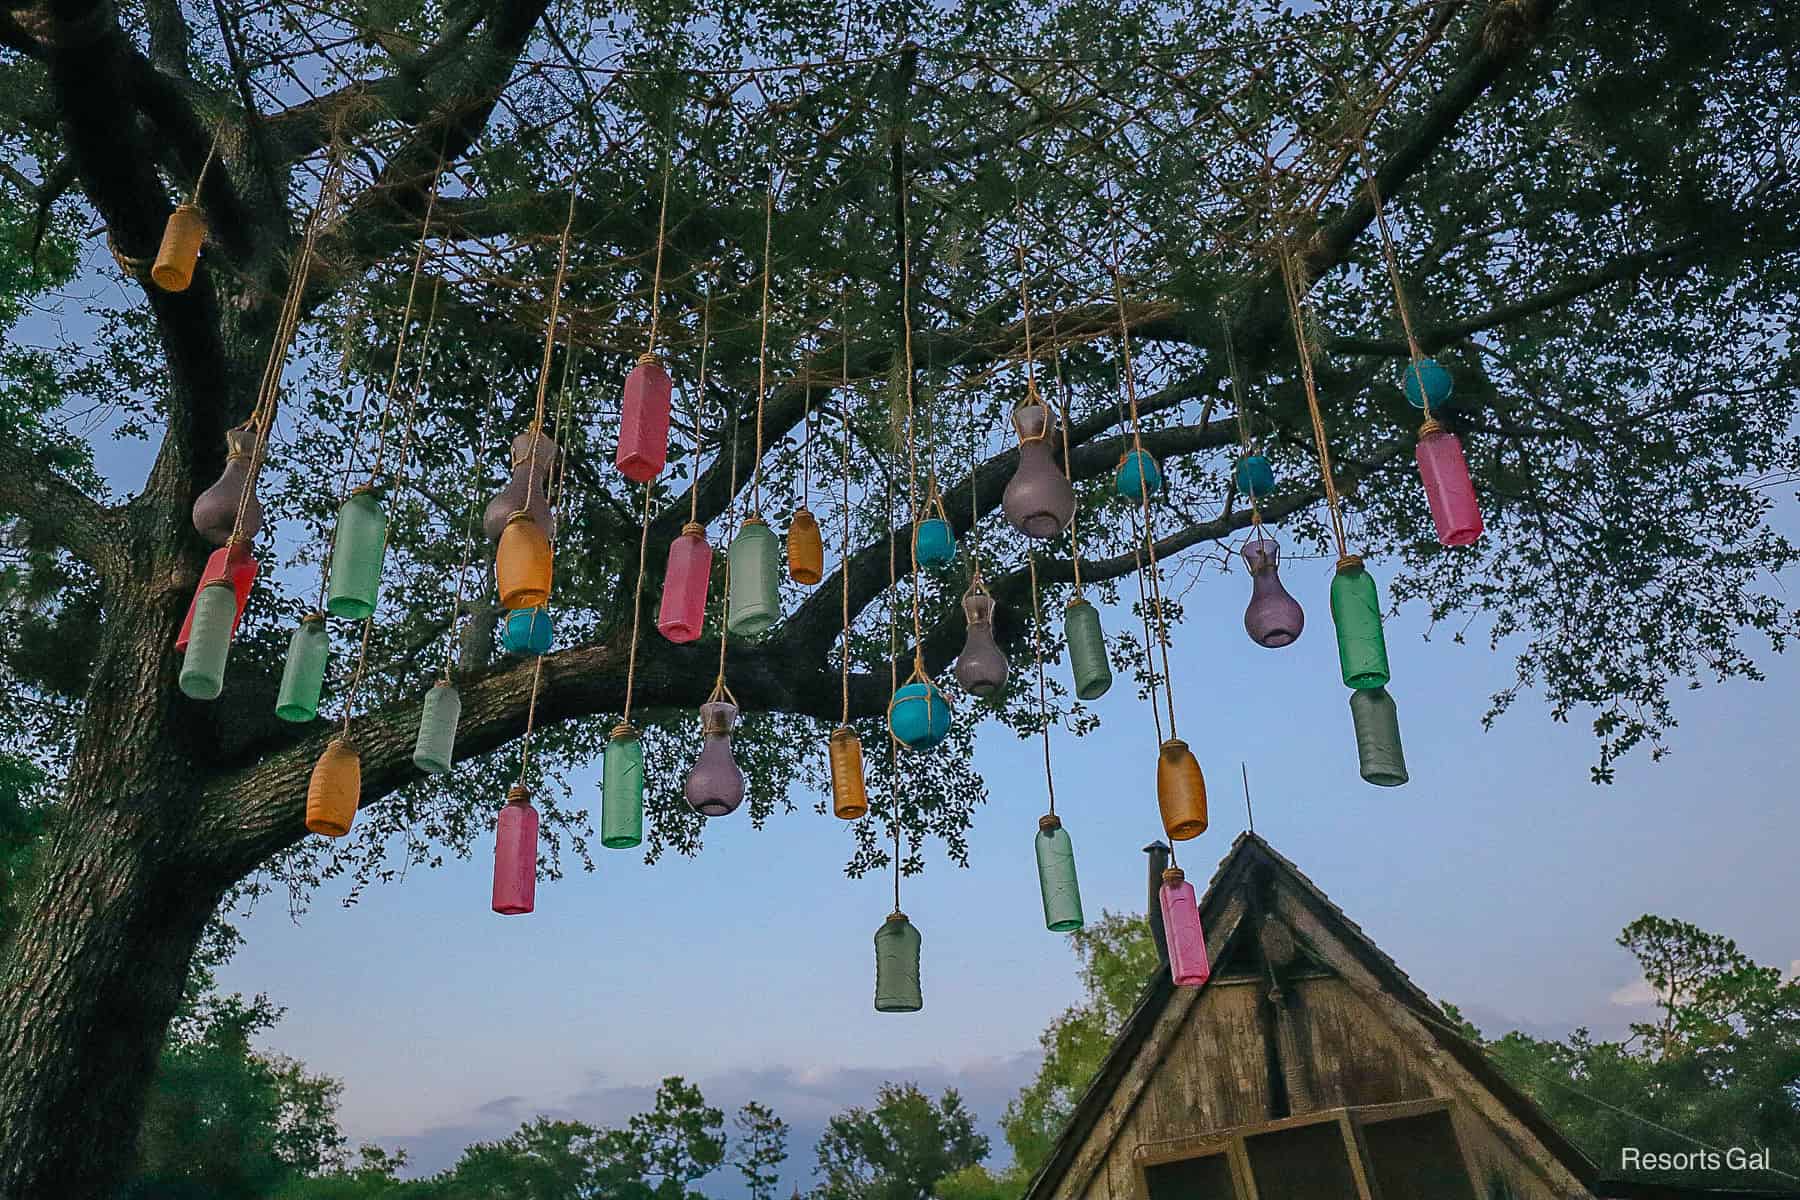 bottles hanging from the trees around the ride in Frontierland 